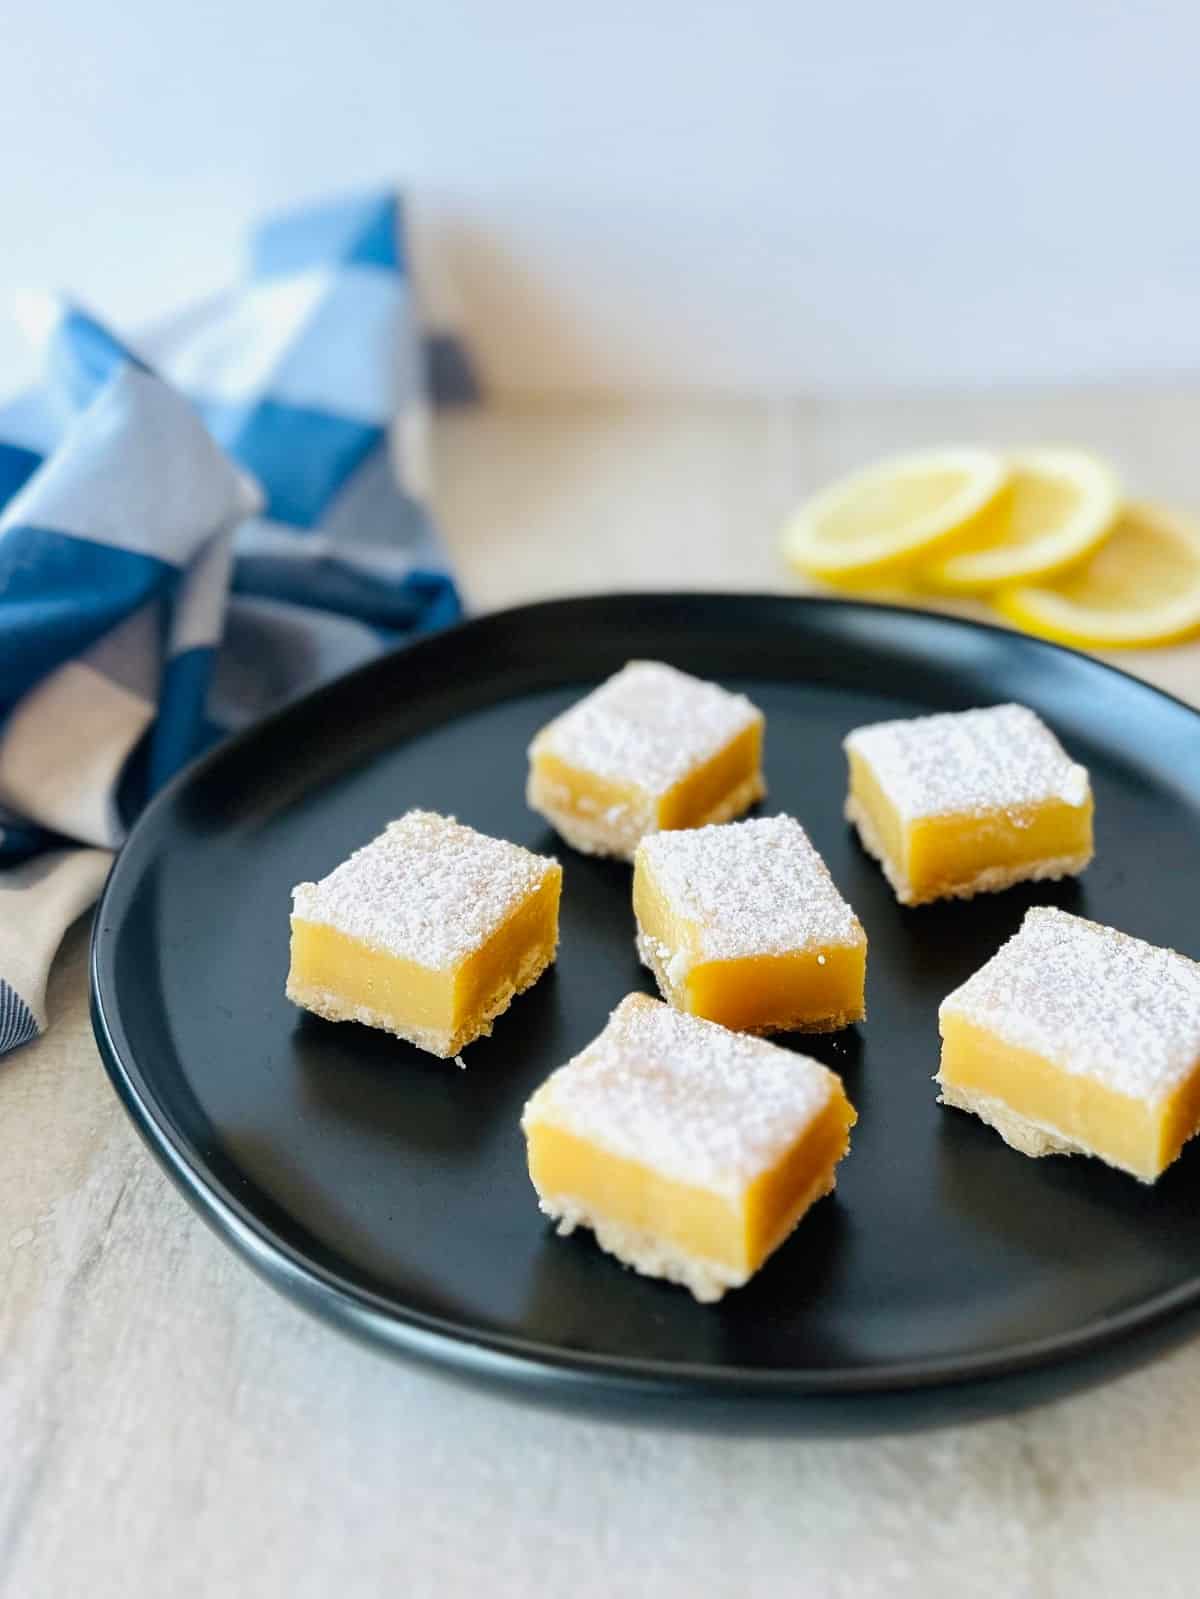 lemon squares with graham crust on black plate with sliced lemons and a blue napkin.